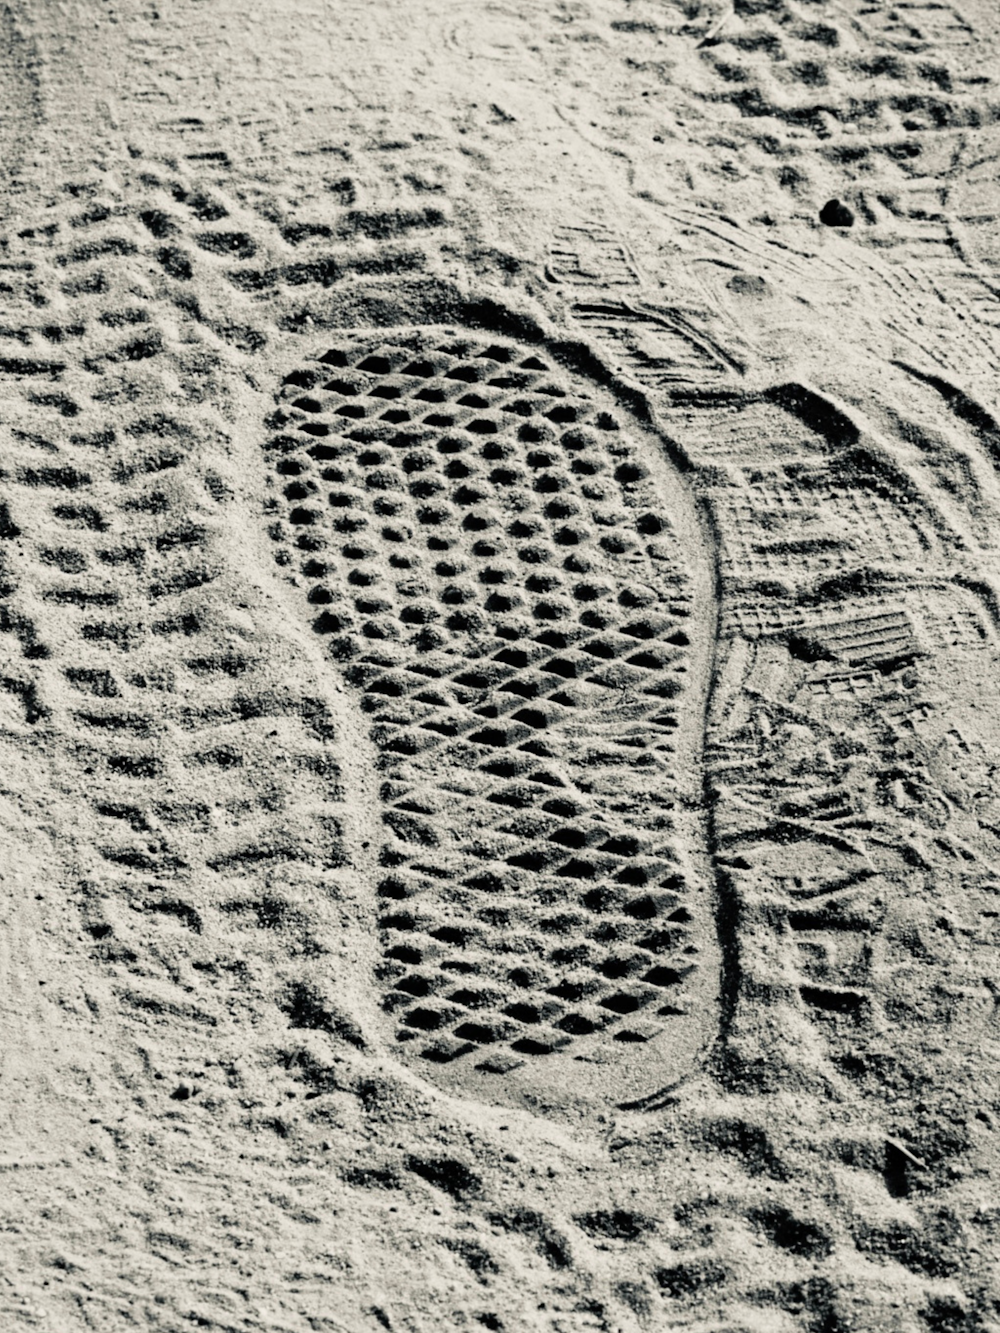 a person's foot prints in the sand on a beach